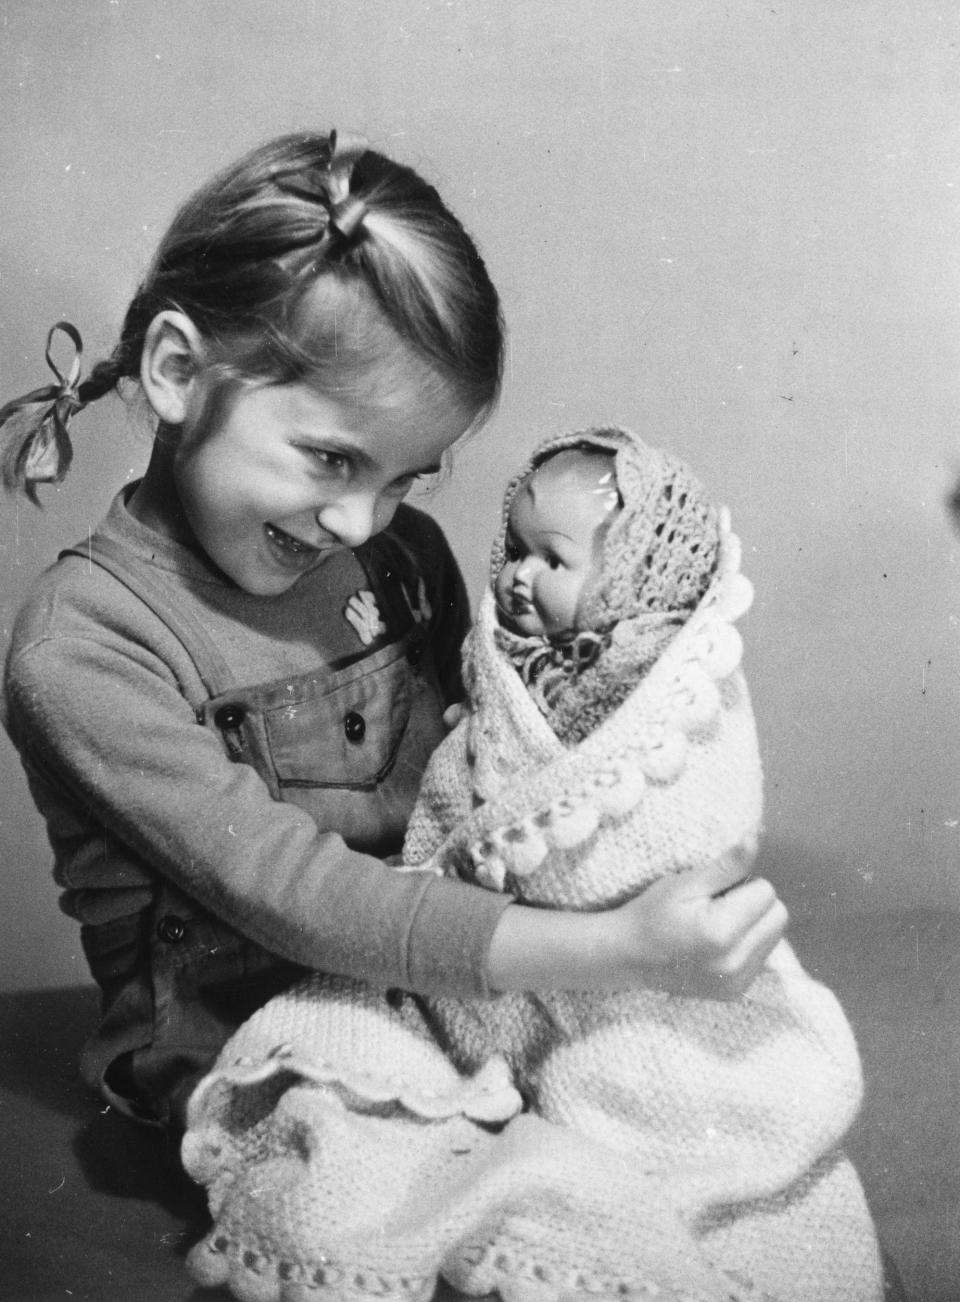 A girl plays with a baby doll in 1950.